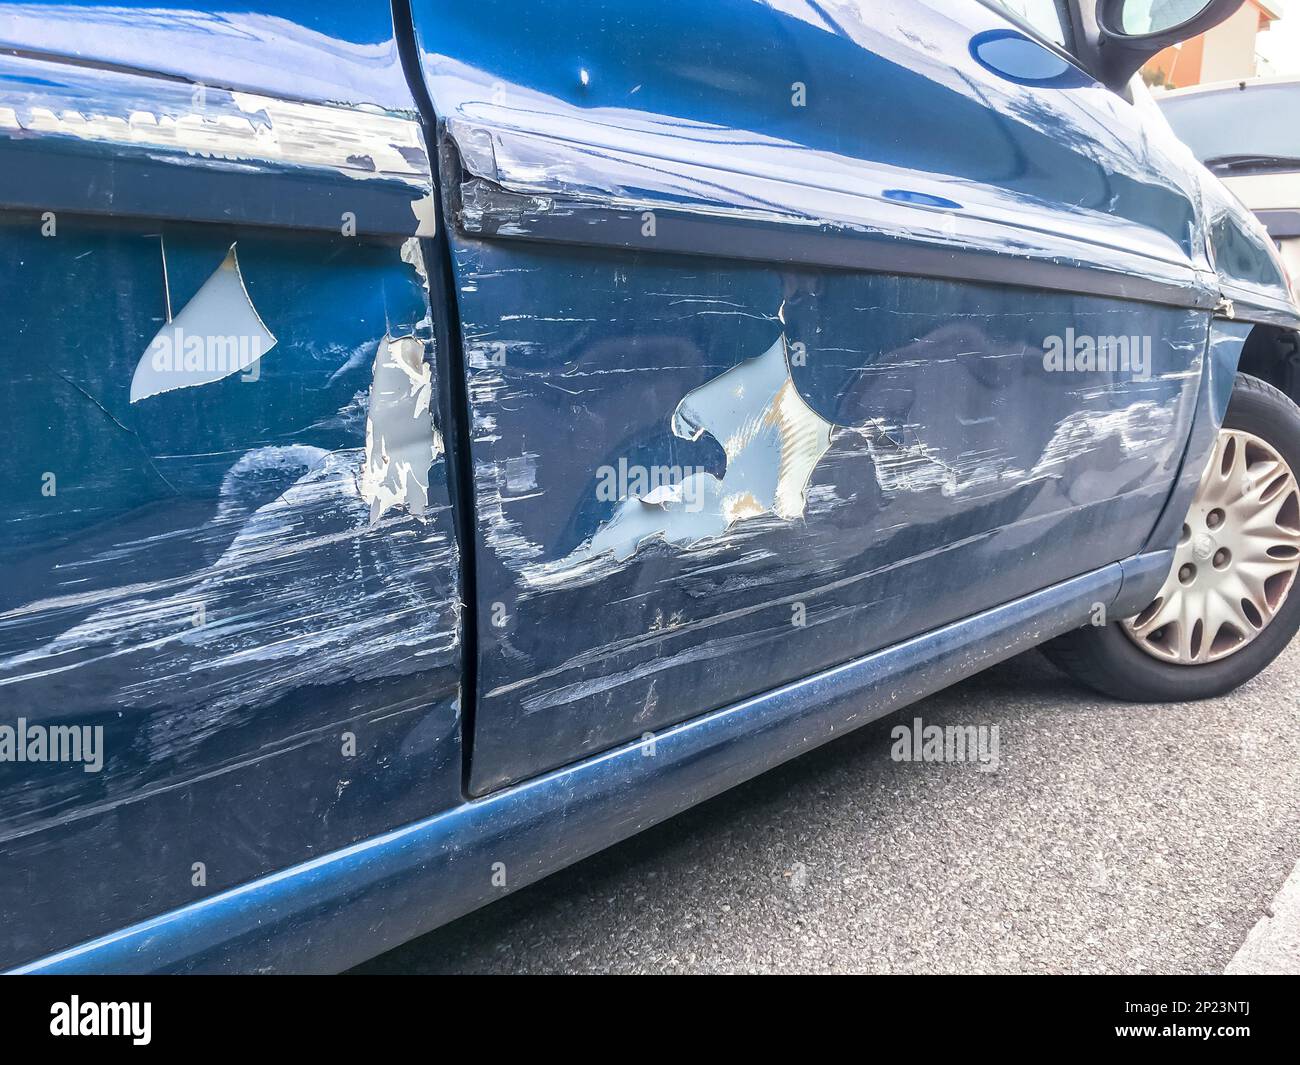 Blue car with a dent in the side of the car in the street after an accident Stock Photo